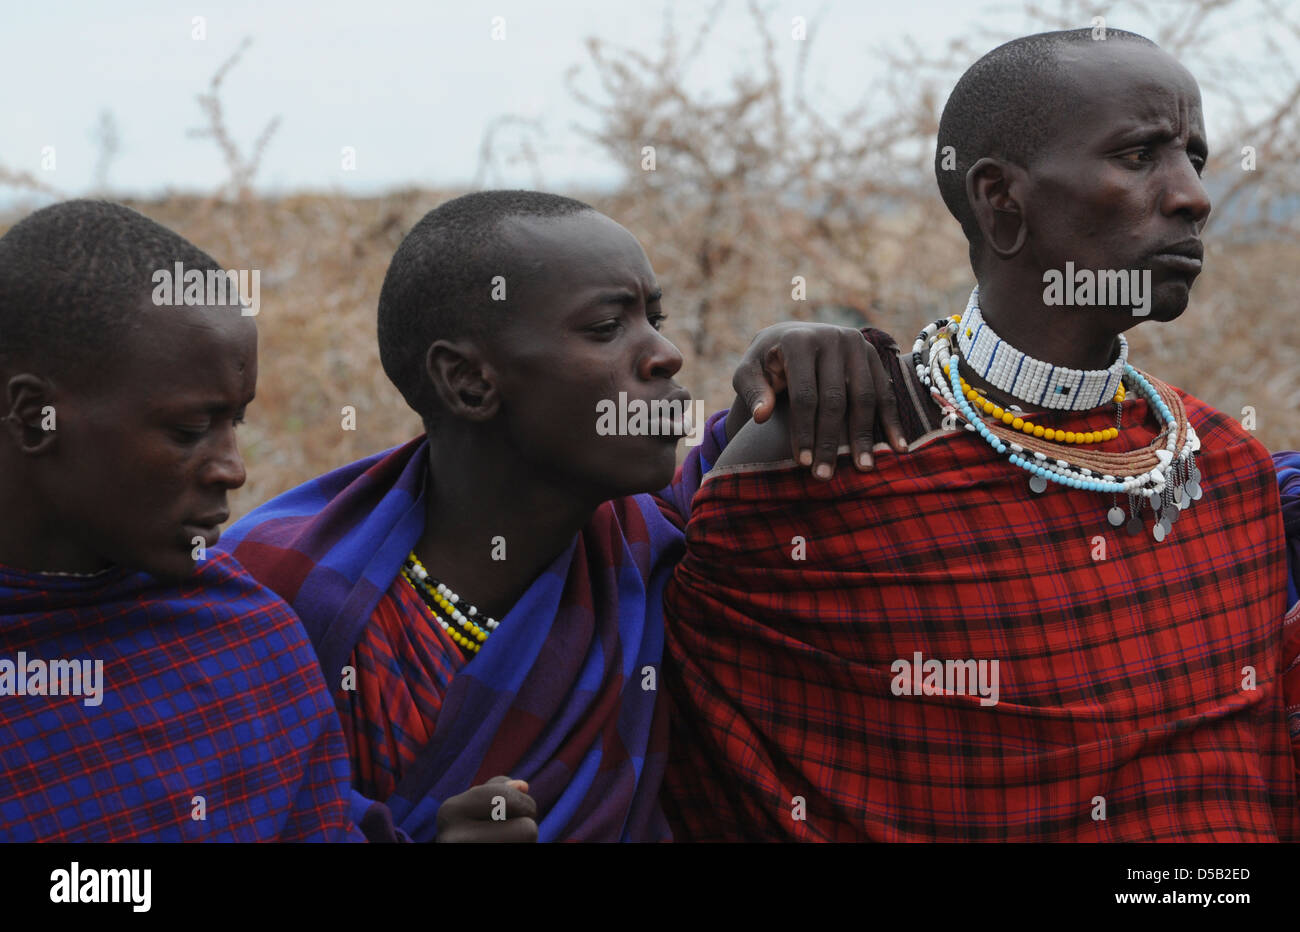 Africa, Tanzania, Maasai tribe an ethnic group of semi-nomadic people. A group in traditional dance Stock Photo